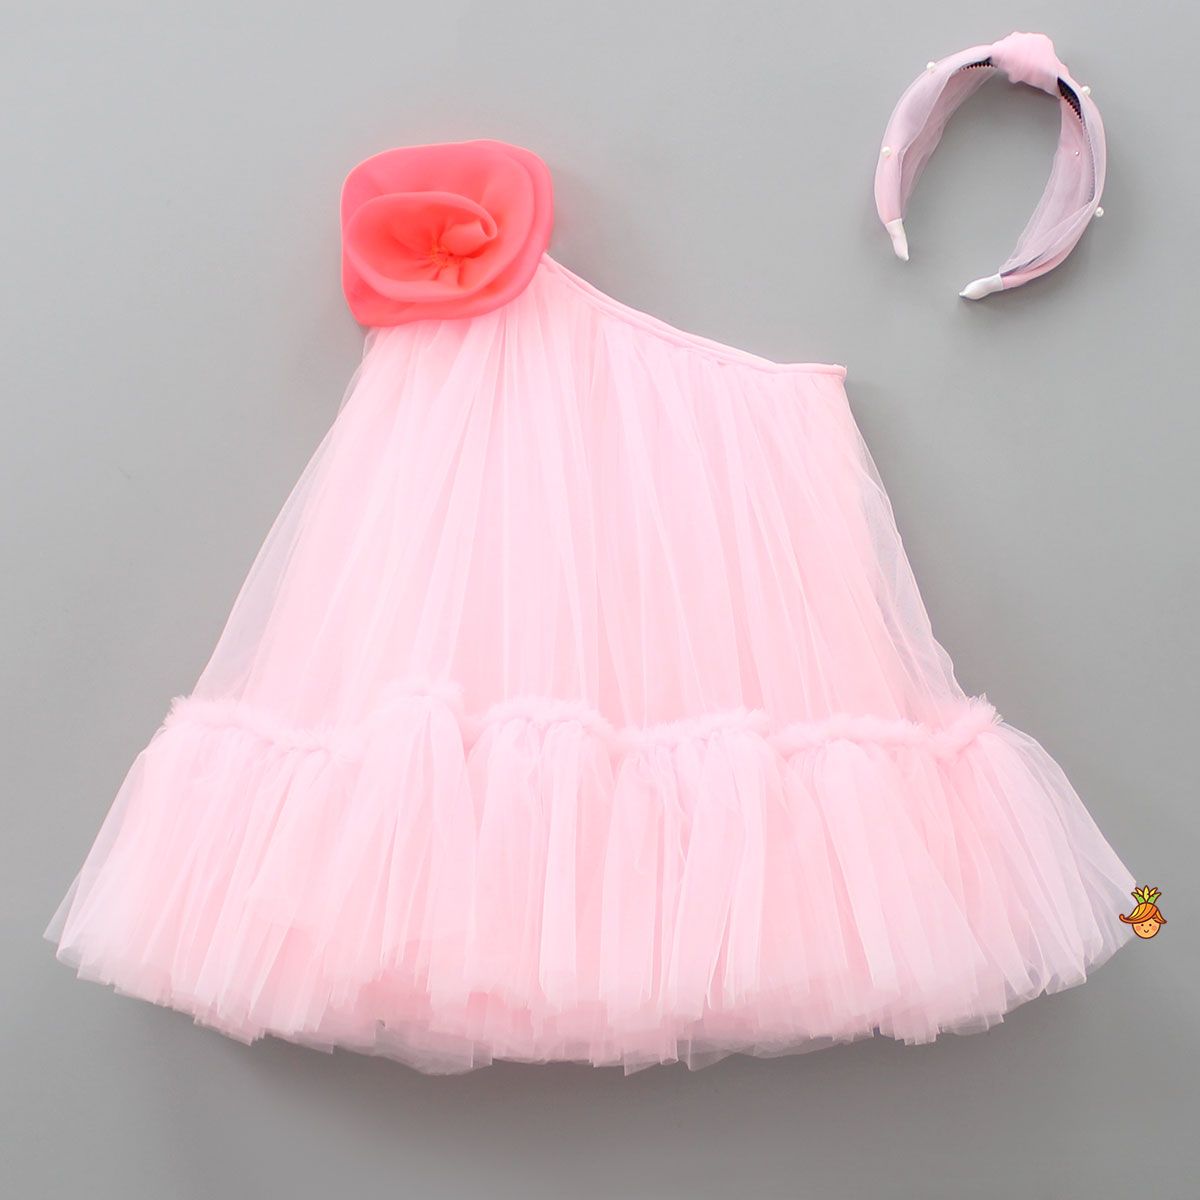 Swirled Flower Enhanced Pink One Shoulder Dress With Hair Band